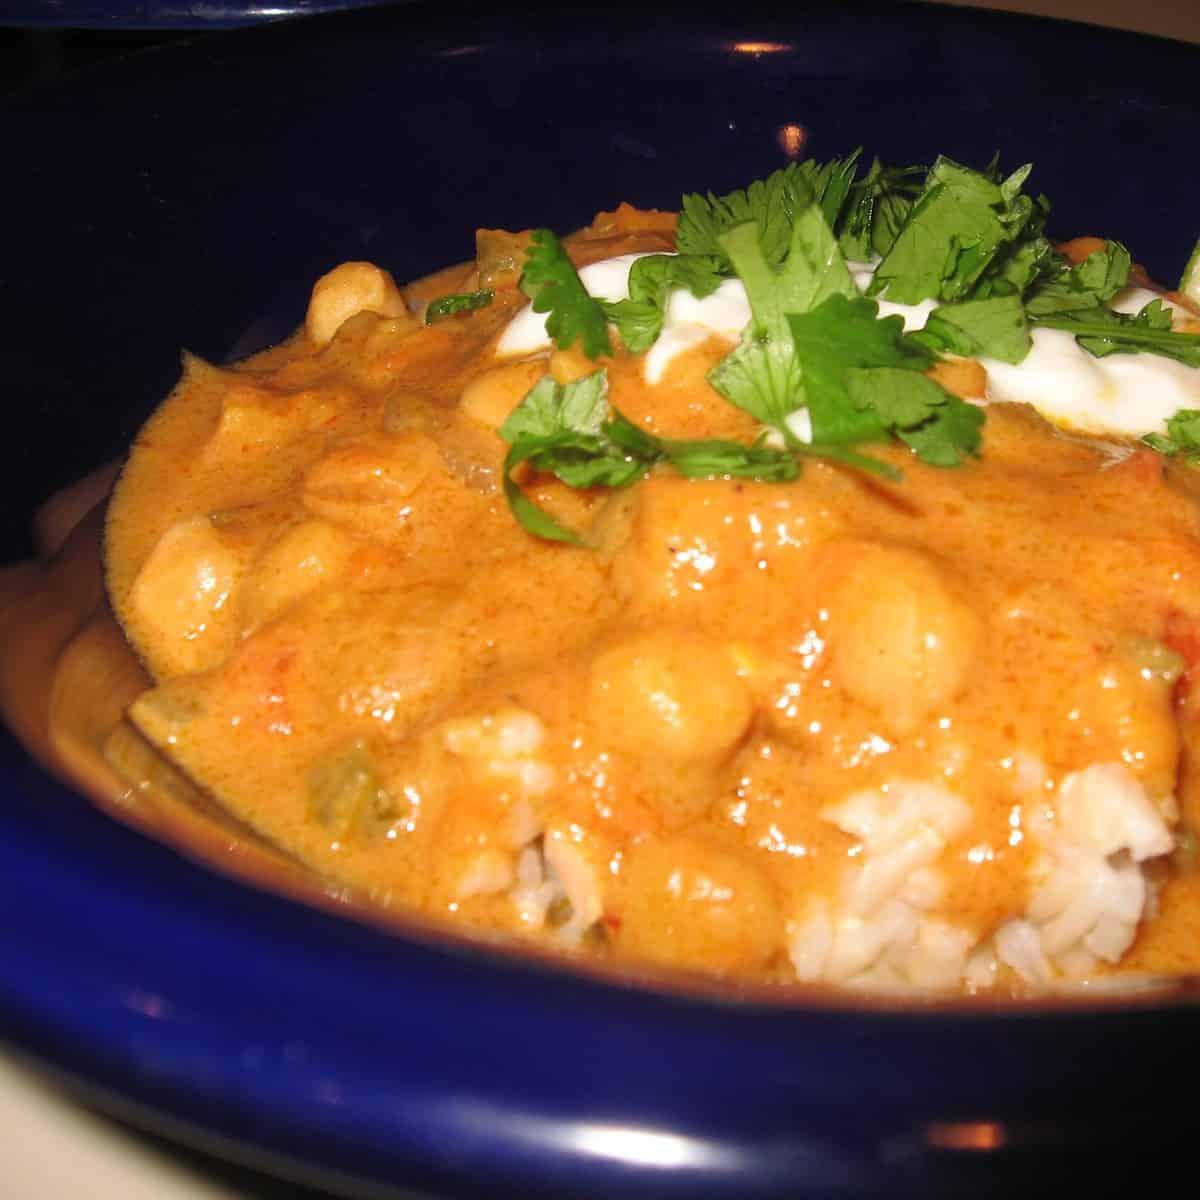 Satisfy your cravings with this Vegetarian Peanut Curry